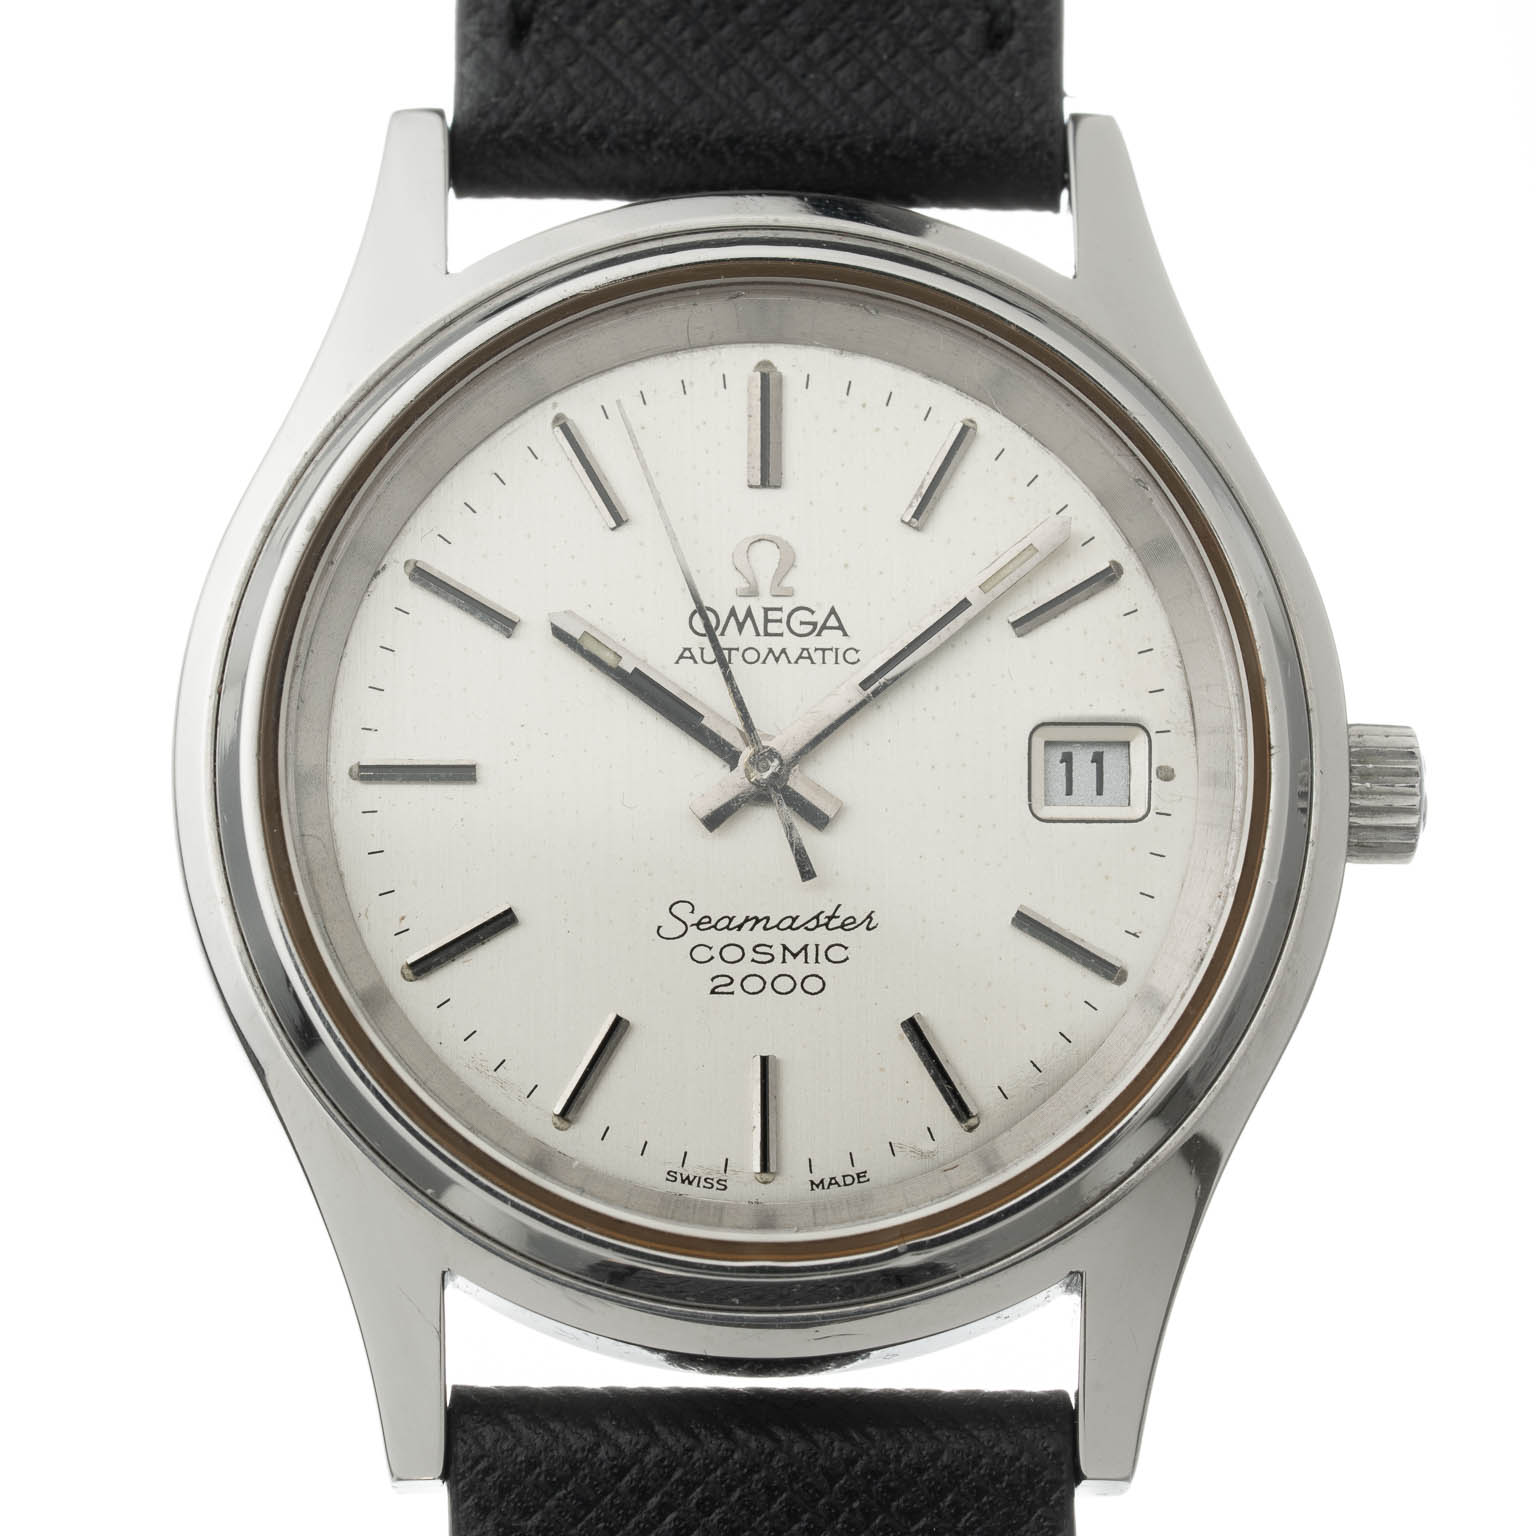 Vintage Omega Seamaster Cosmic 2000 with white dial 166.129 from 1970s